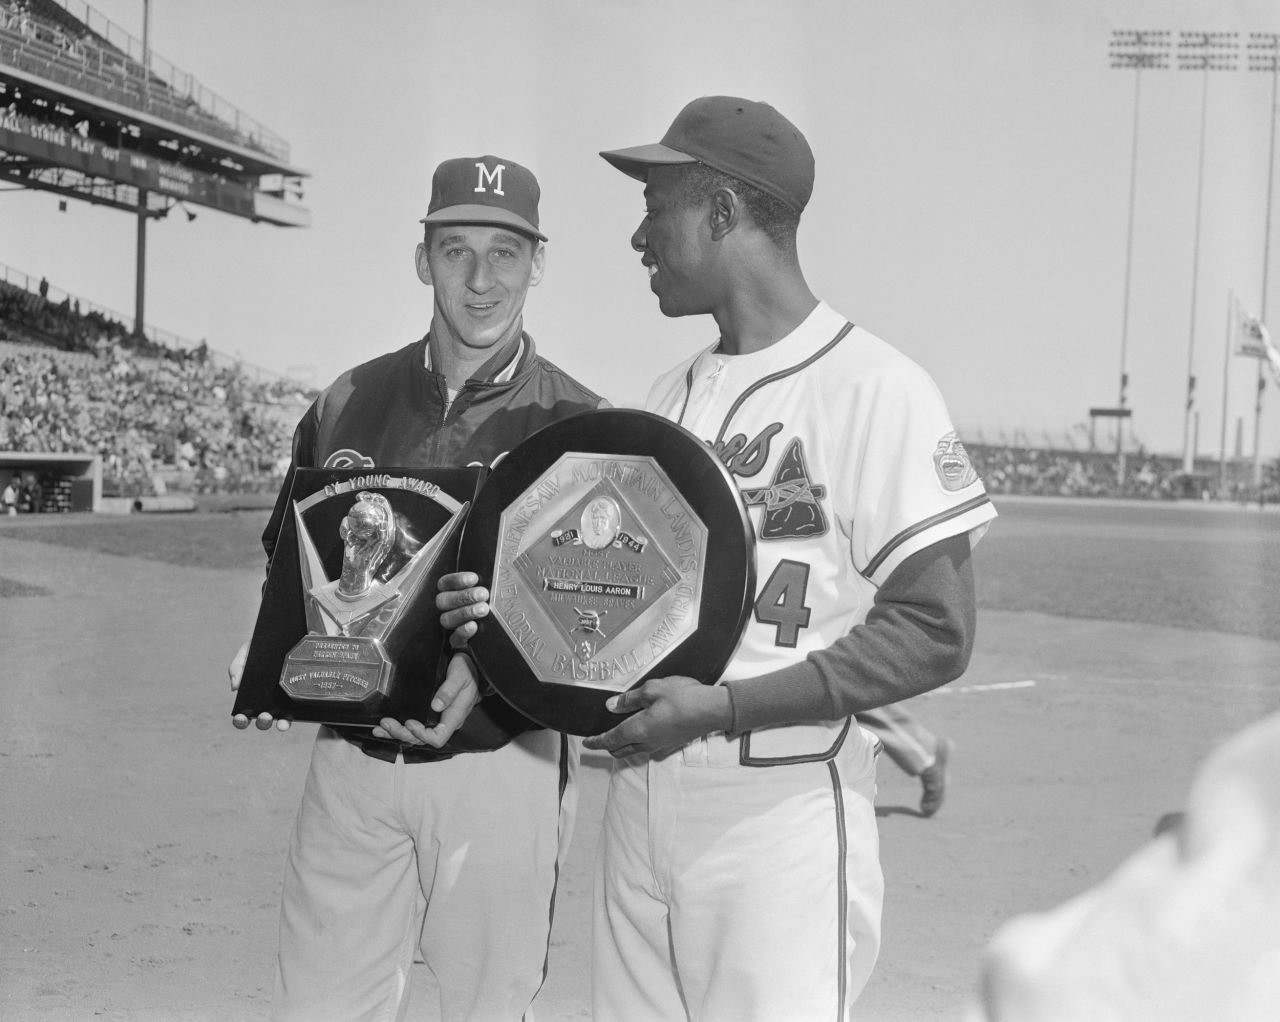 Aaron holds his MVP award with Braves pitcher Warren Spahn, who won the Cy Young Award that year.